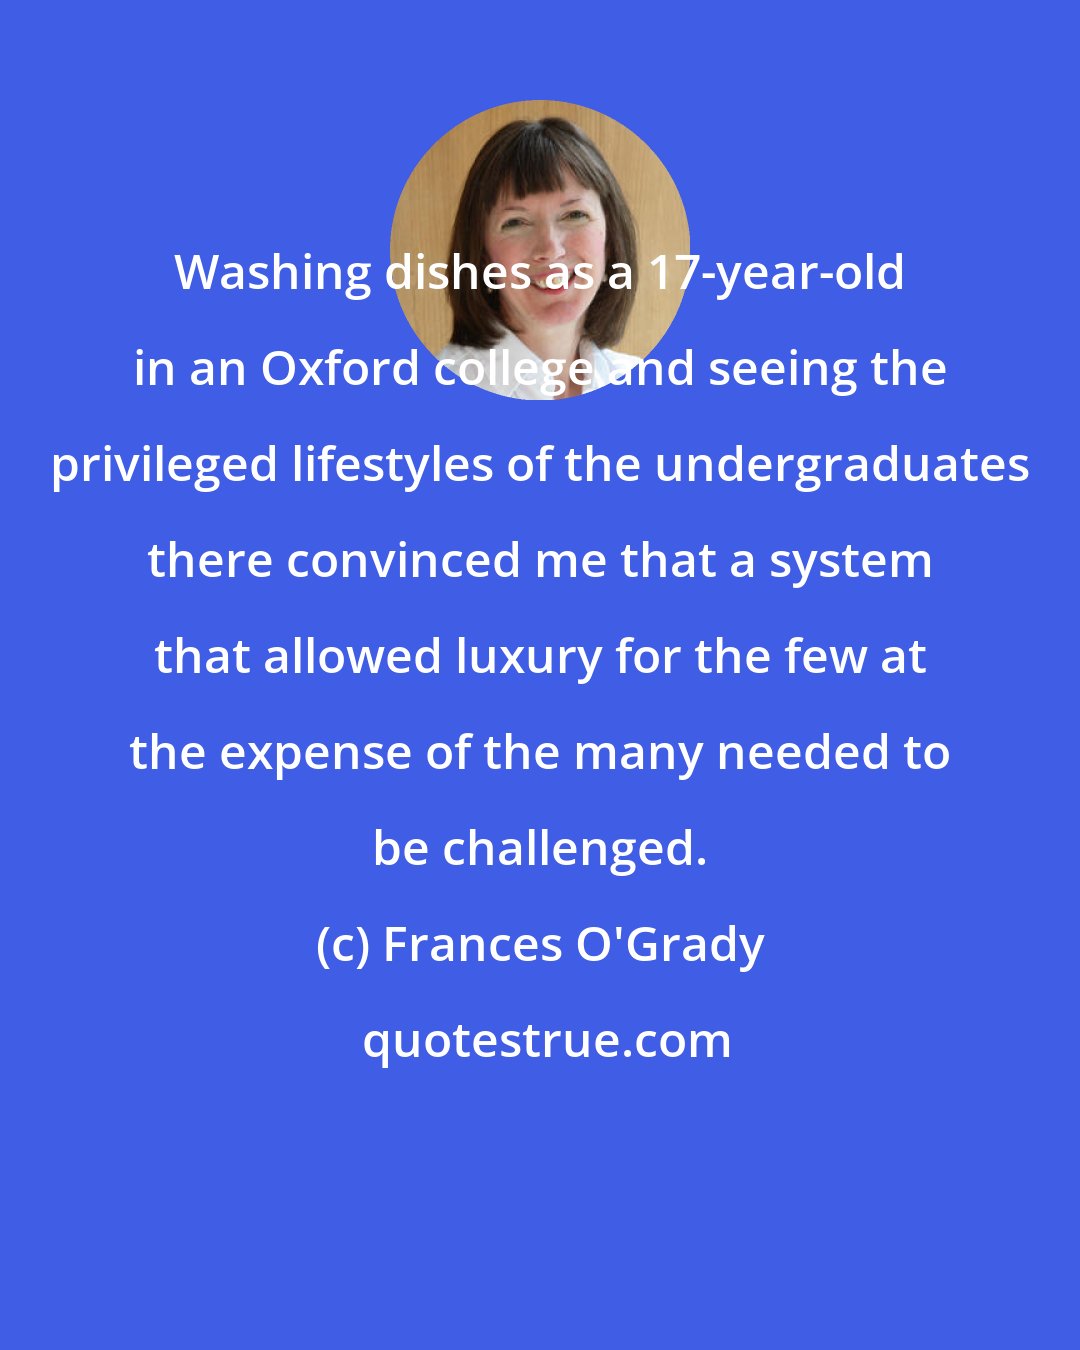 Frances O'Grady: Washing dishes as a 17-year-old in an Oxford college and seeing the privileged lifestyles of the undergraduates there convinced me that a system that allowed luxury for the few at the expense of the many needed to be challenged.